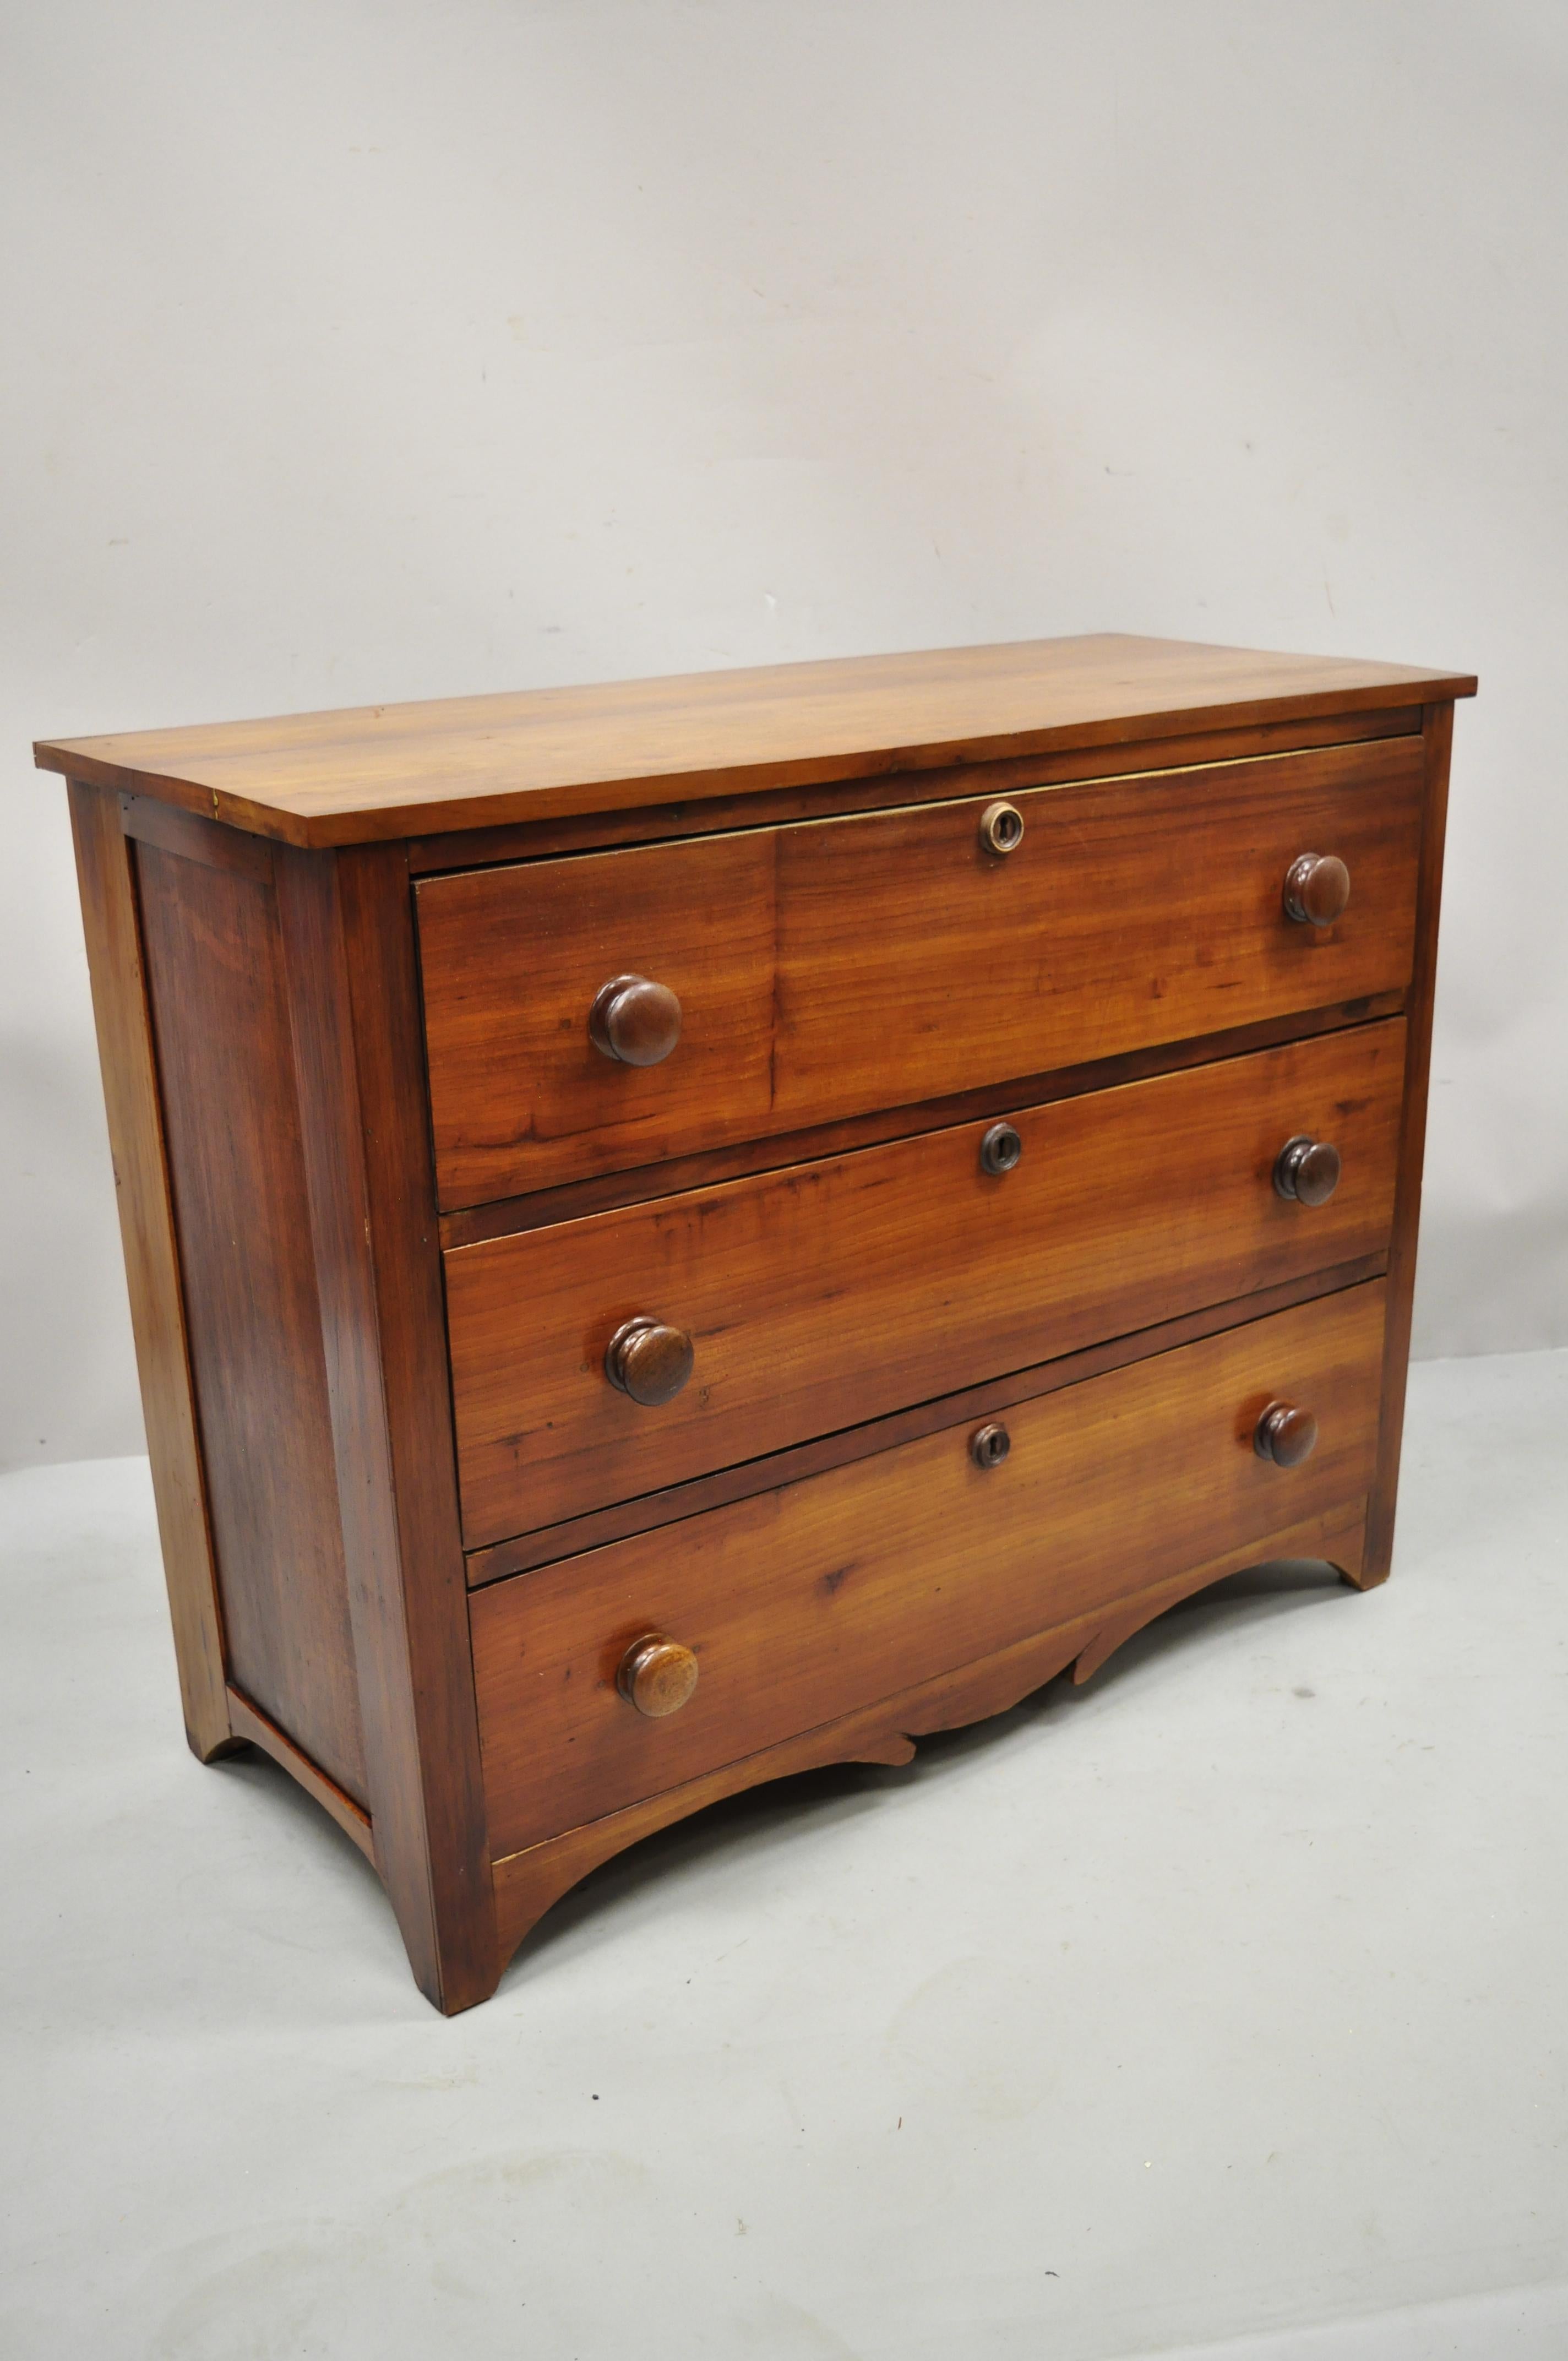 Antique 19th century cherry wood three drawer Colonial Primitive dresser chest. Item features solid wood construction, beautiful wood grain, no key, but unlocked, 3 drawers, very nice antique item, quality American craftsmanship, great style and